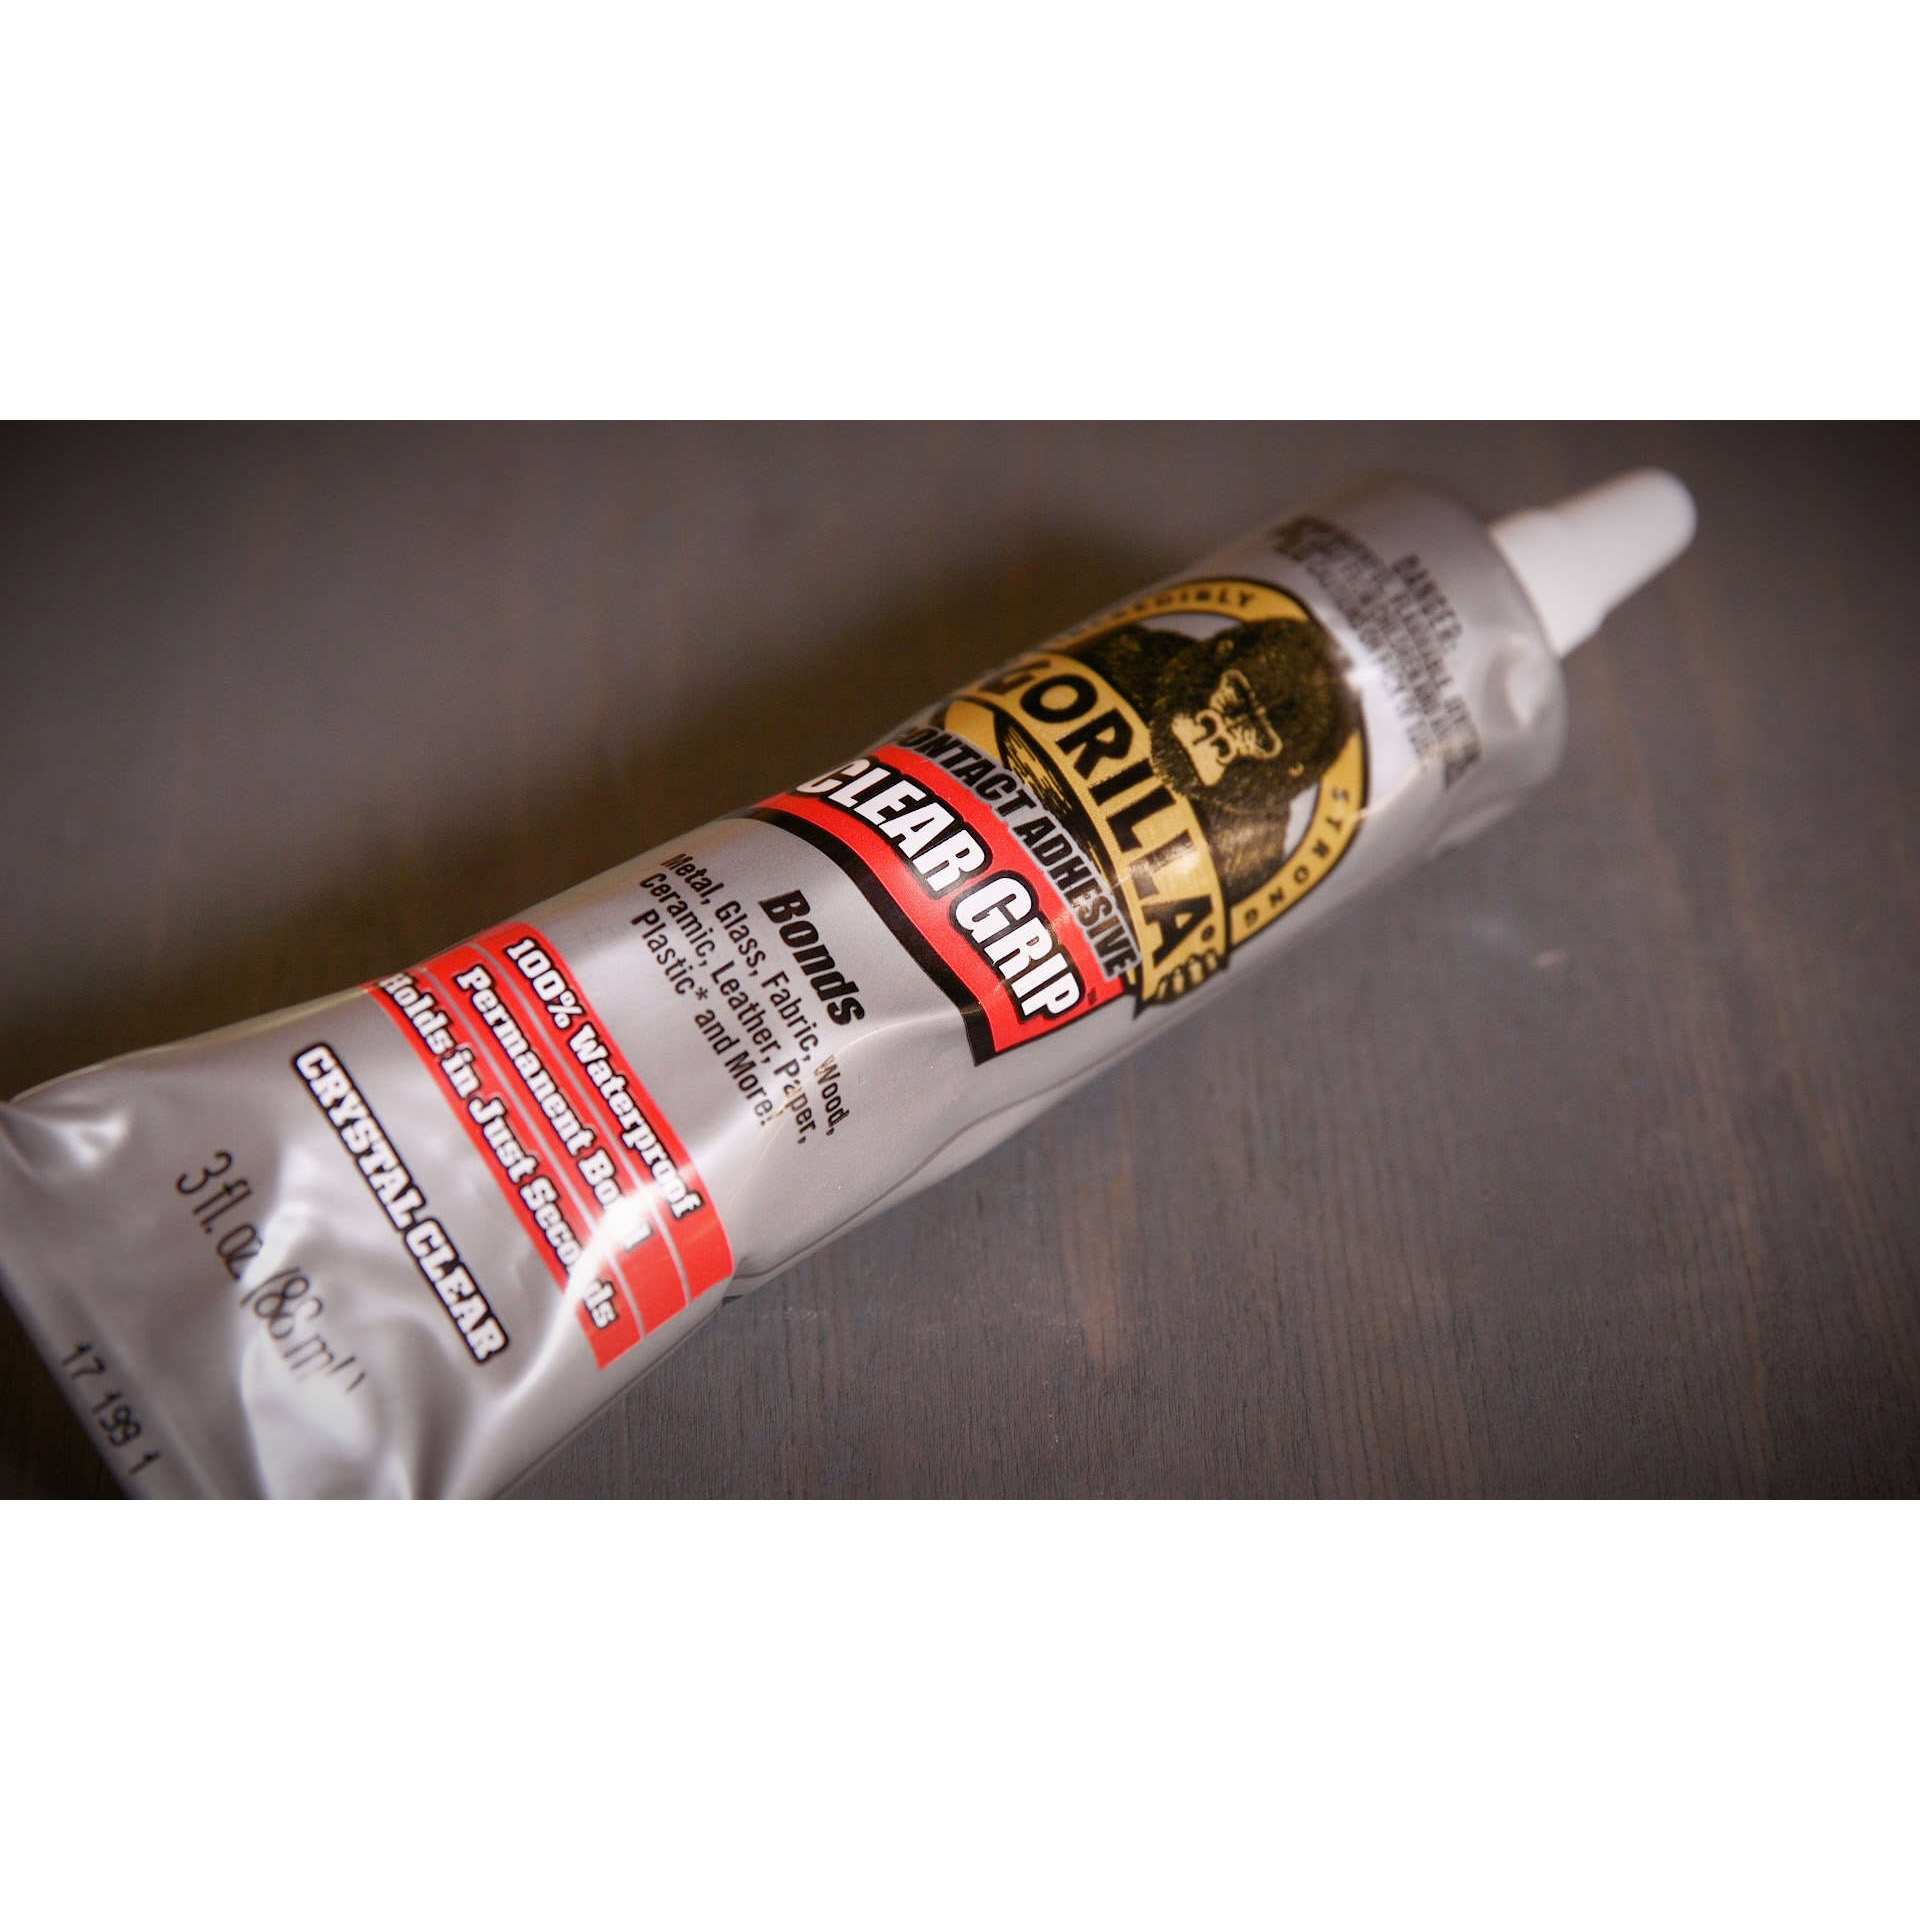 Gorilla Clear Grip 8040002 Contact Adhesive, Clear, 3 oz - 2